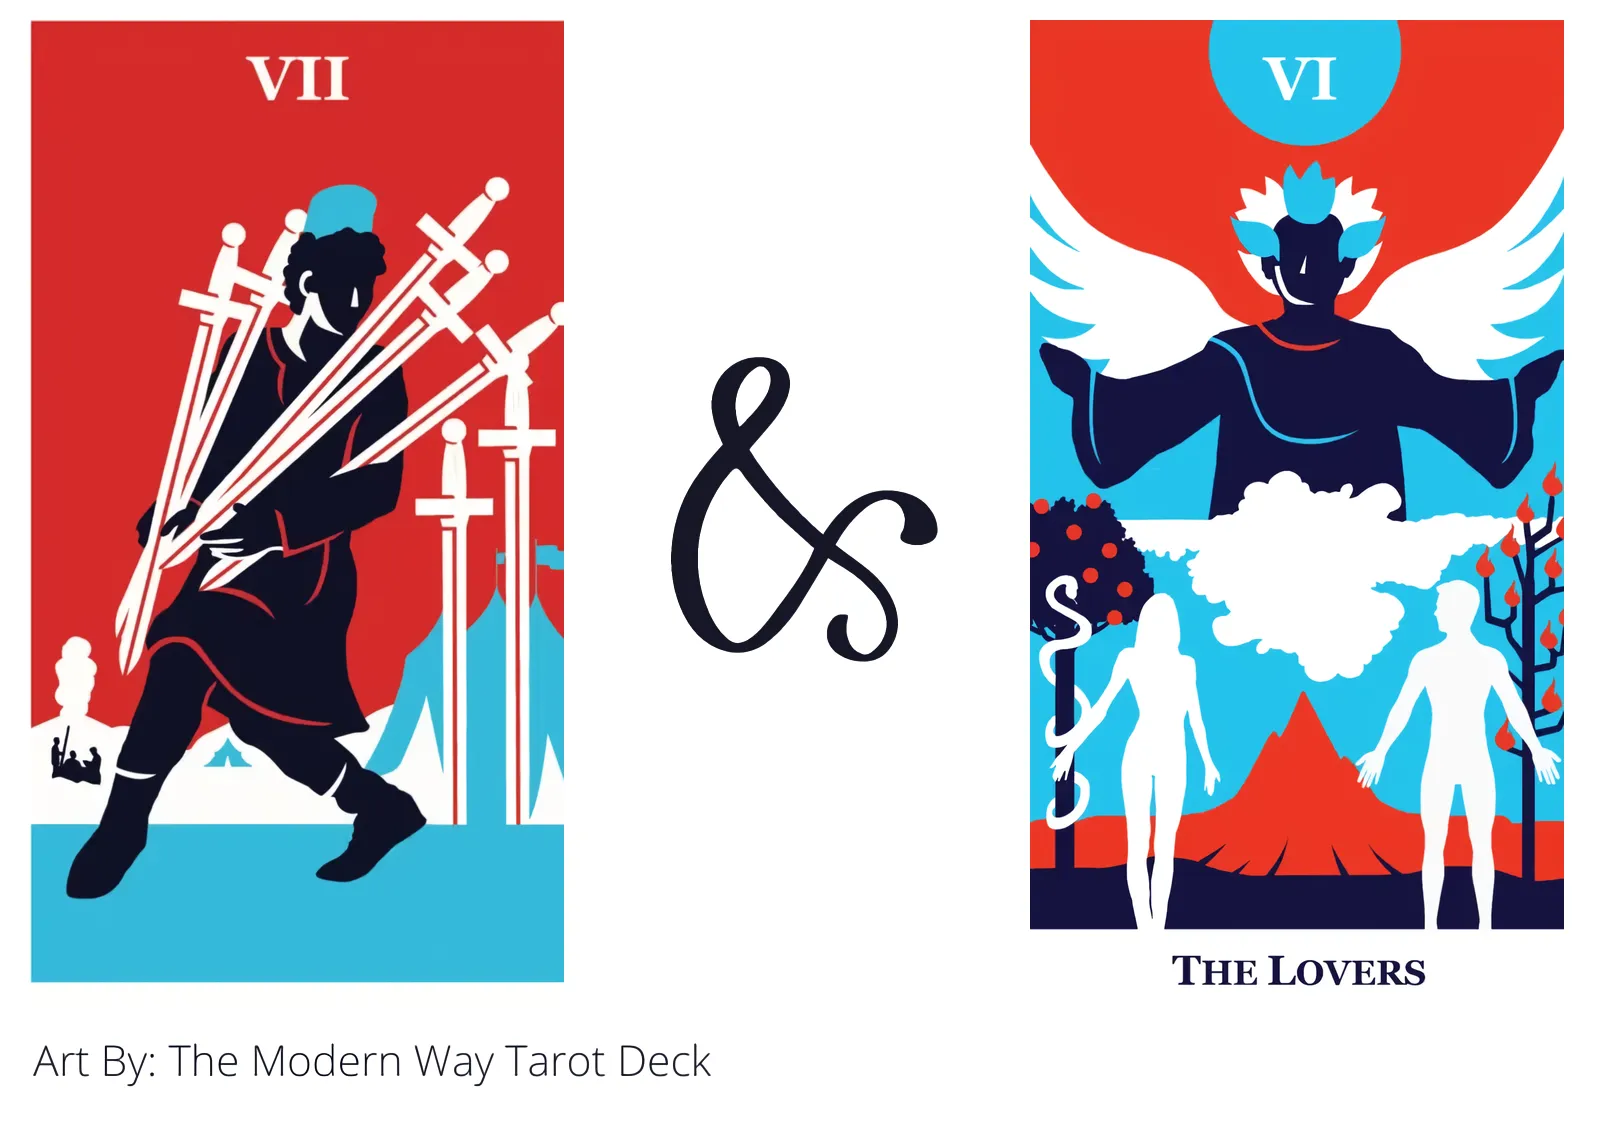 seven of swords and the lovers tarot cards together